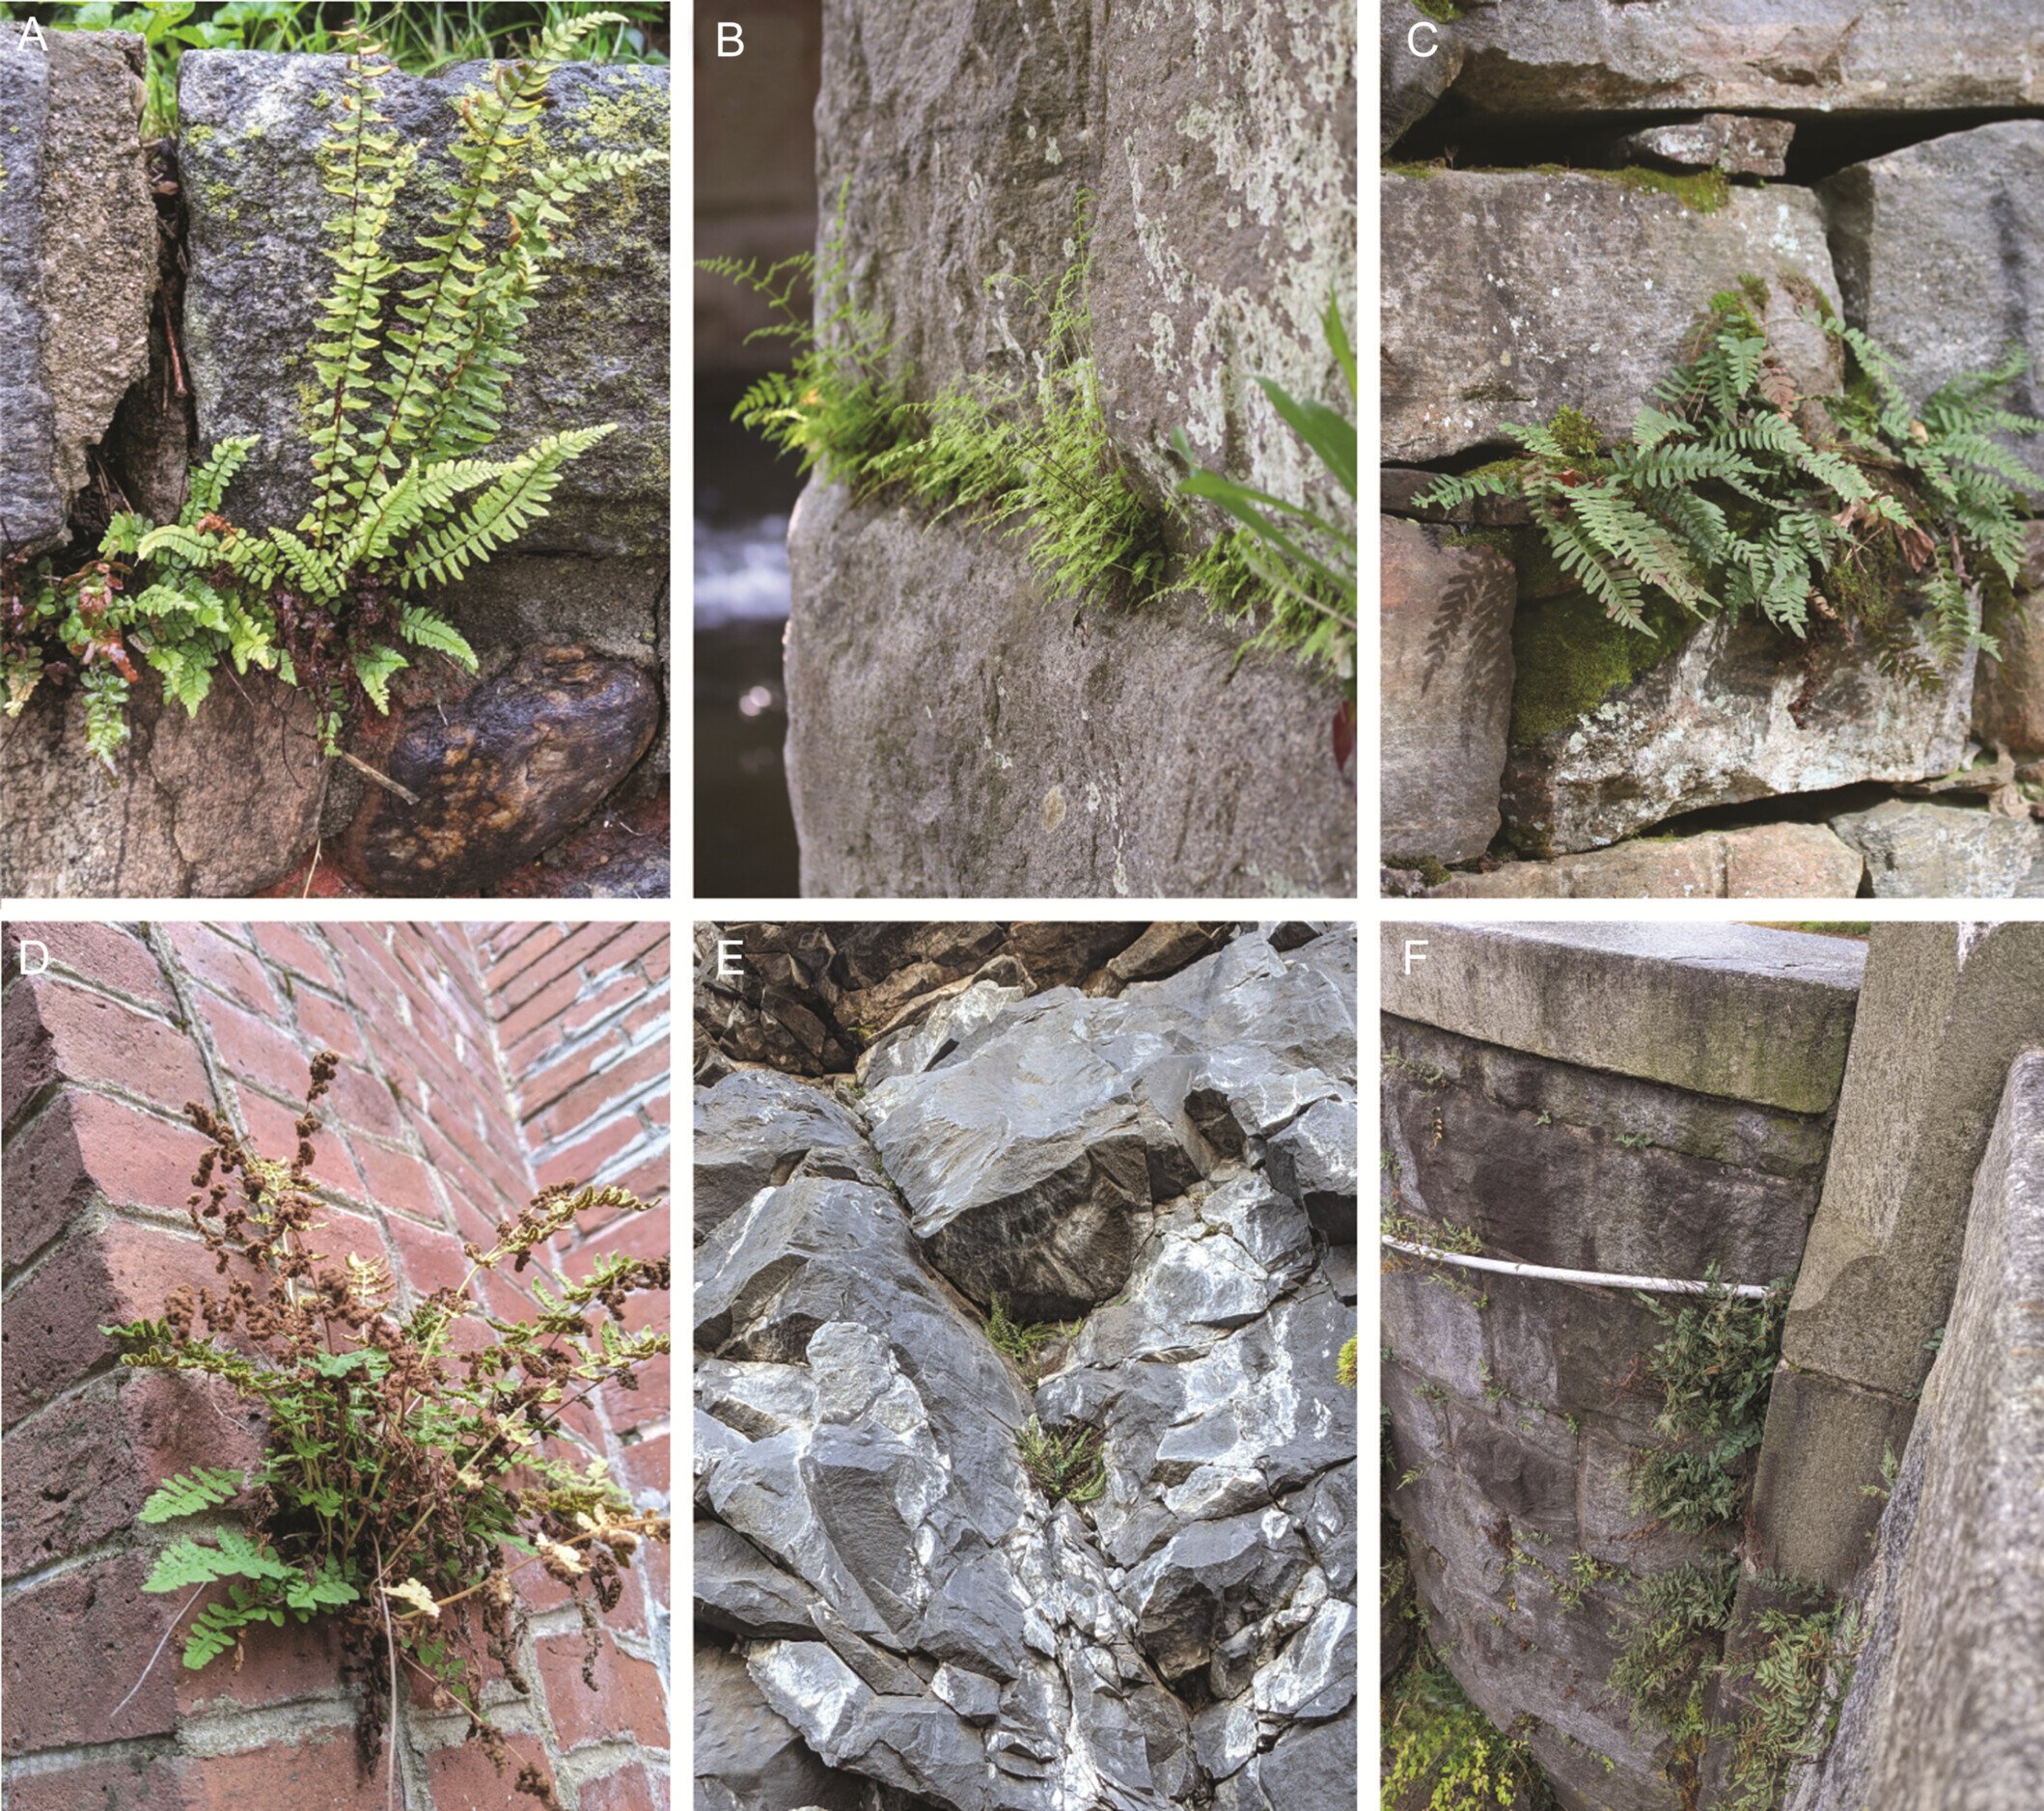 City fern, country fern: Citizen science is helping to study why some plants love the city life